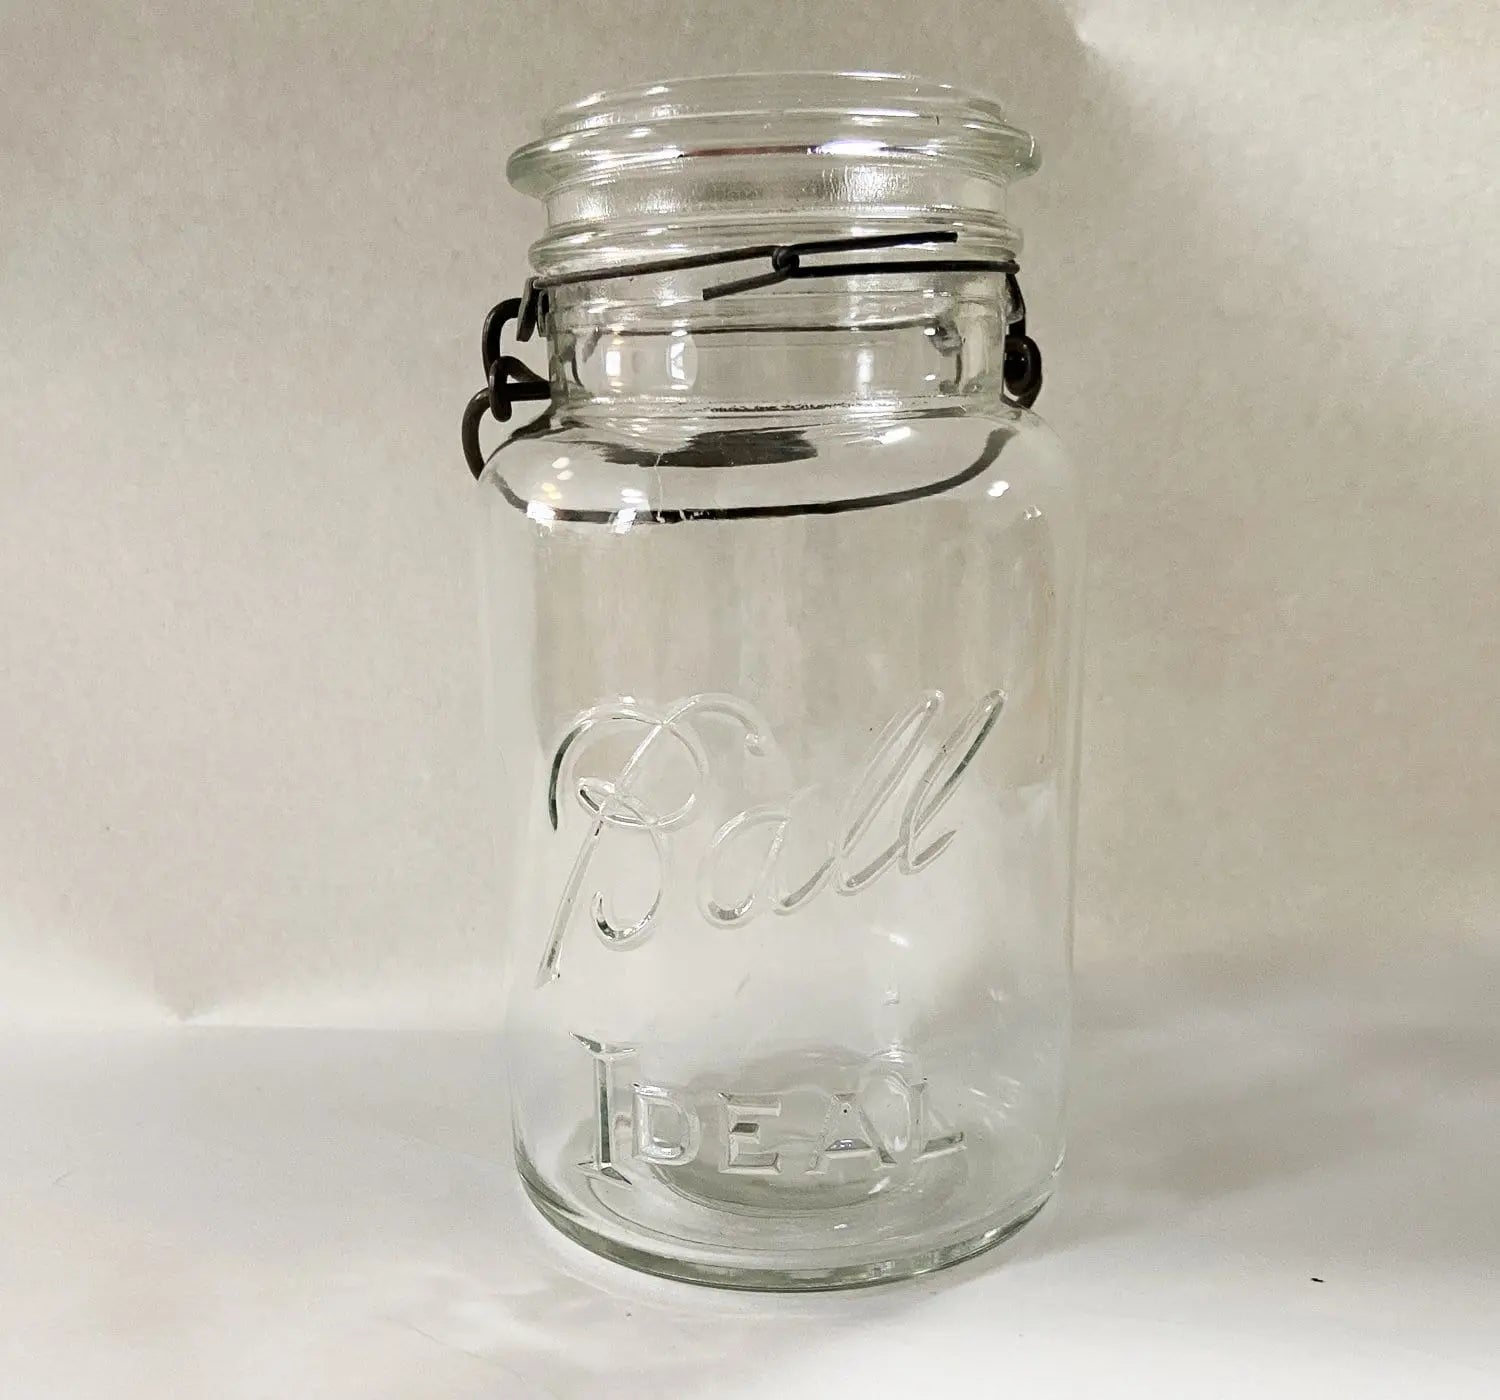 Vintage Ball Mason Jar Replacement The Lamp Goods